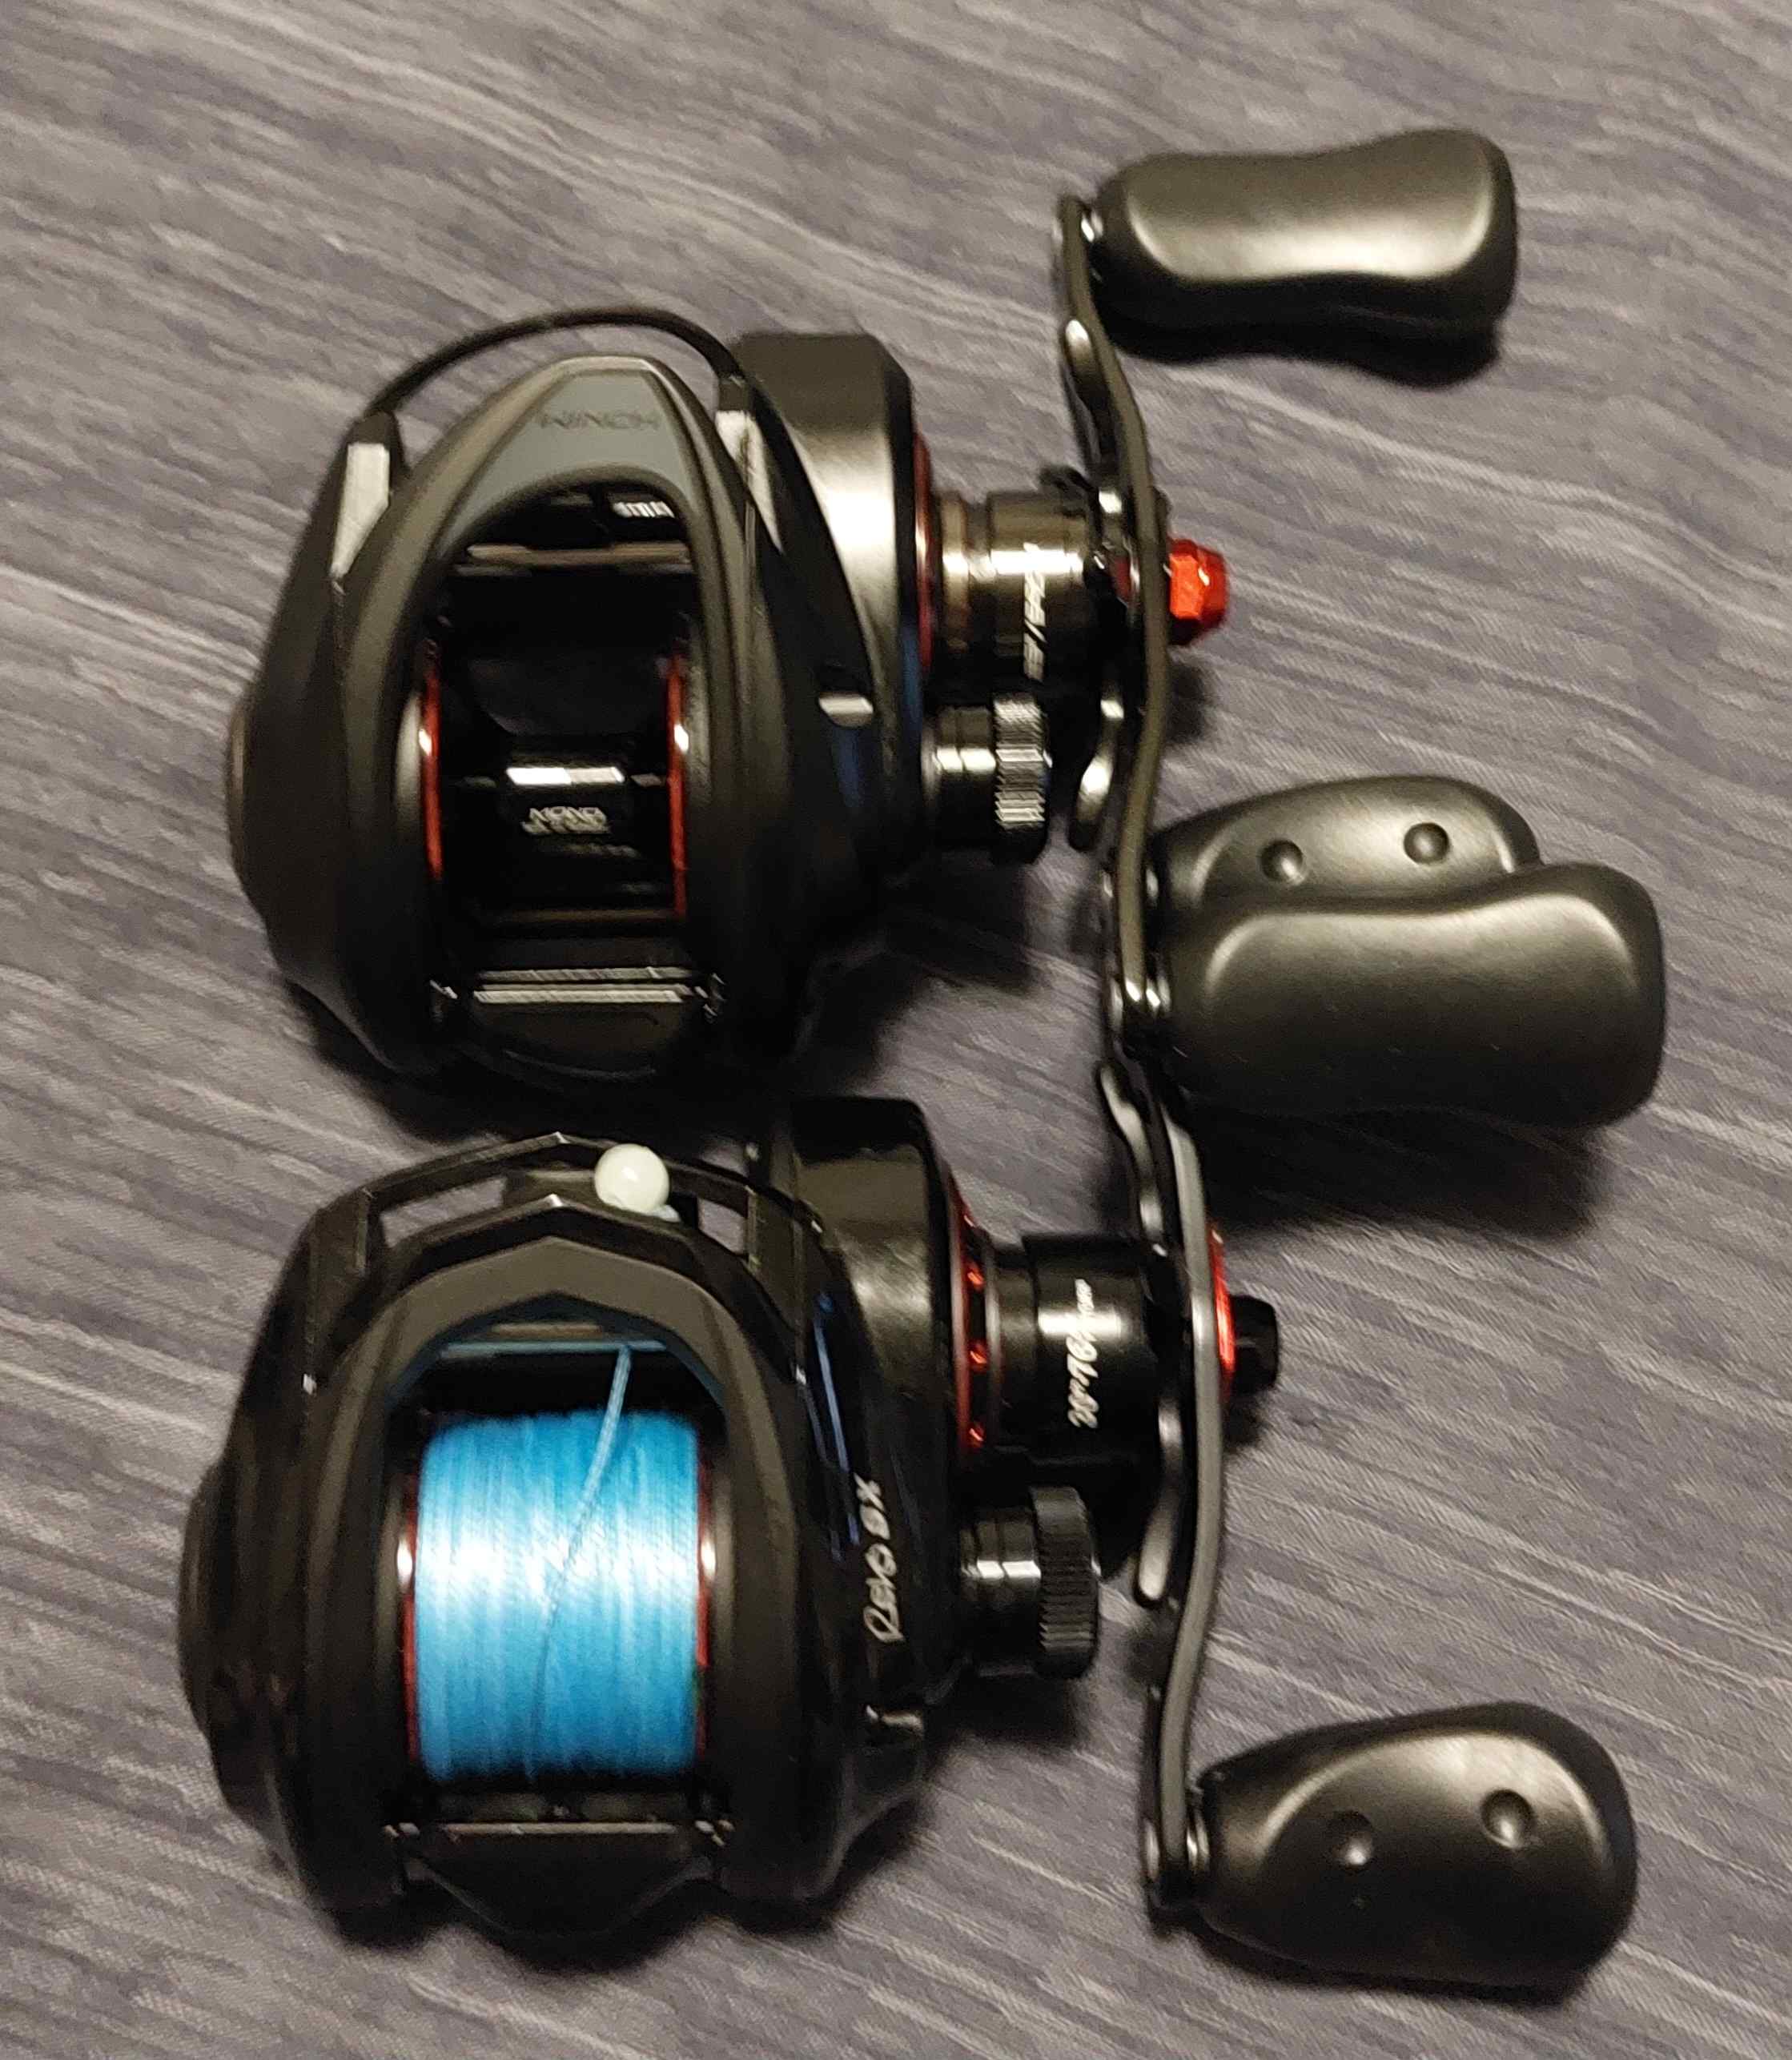 Revo 5 Winch unboxing review - Fishing Rods, Reels, Line, and